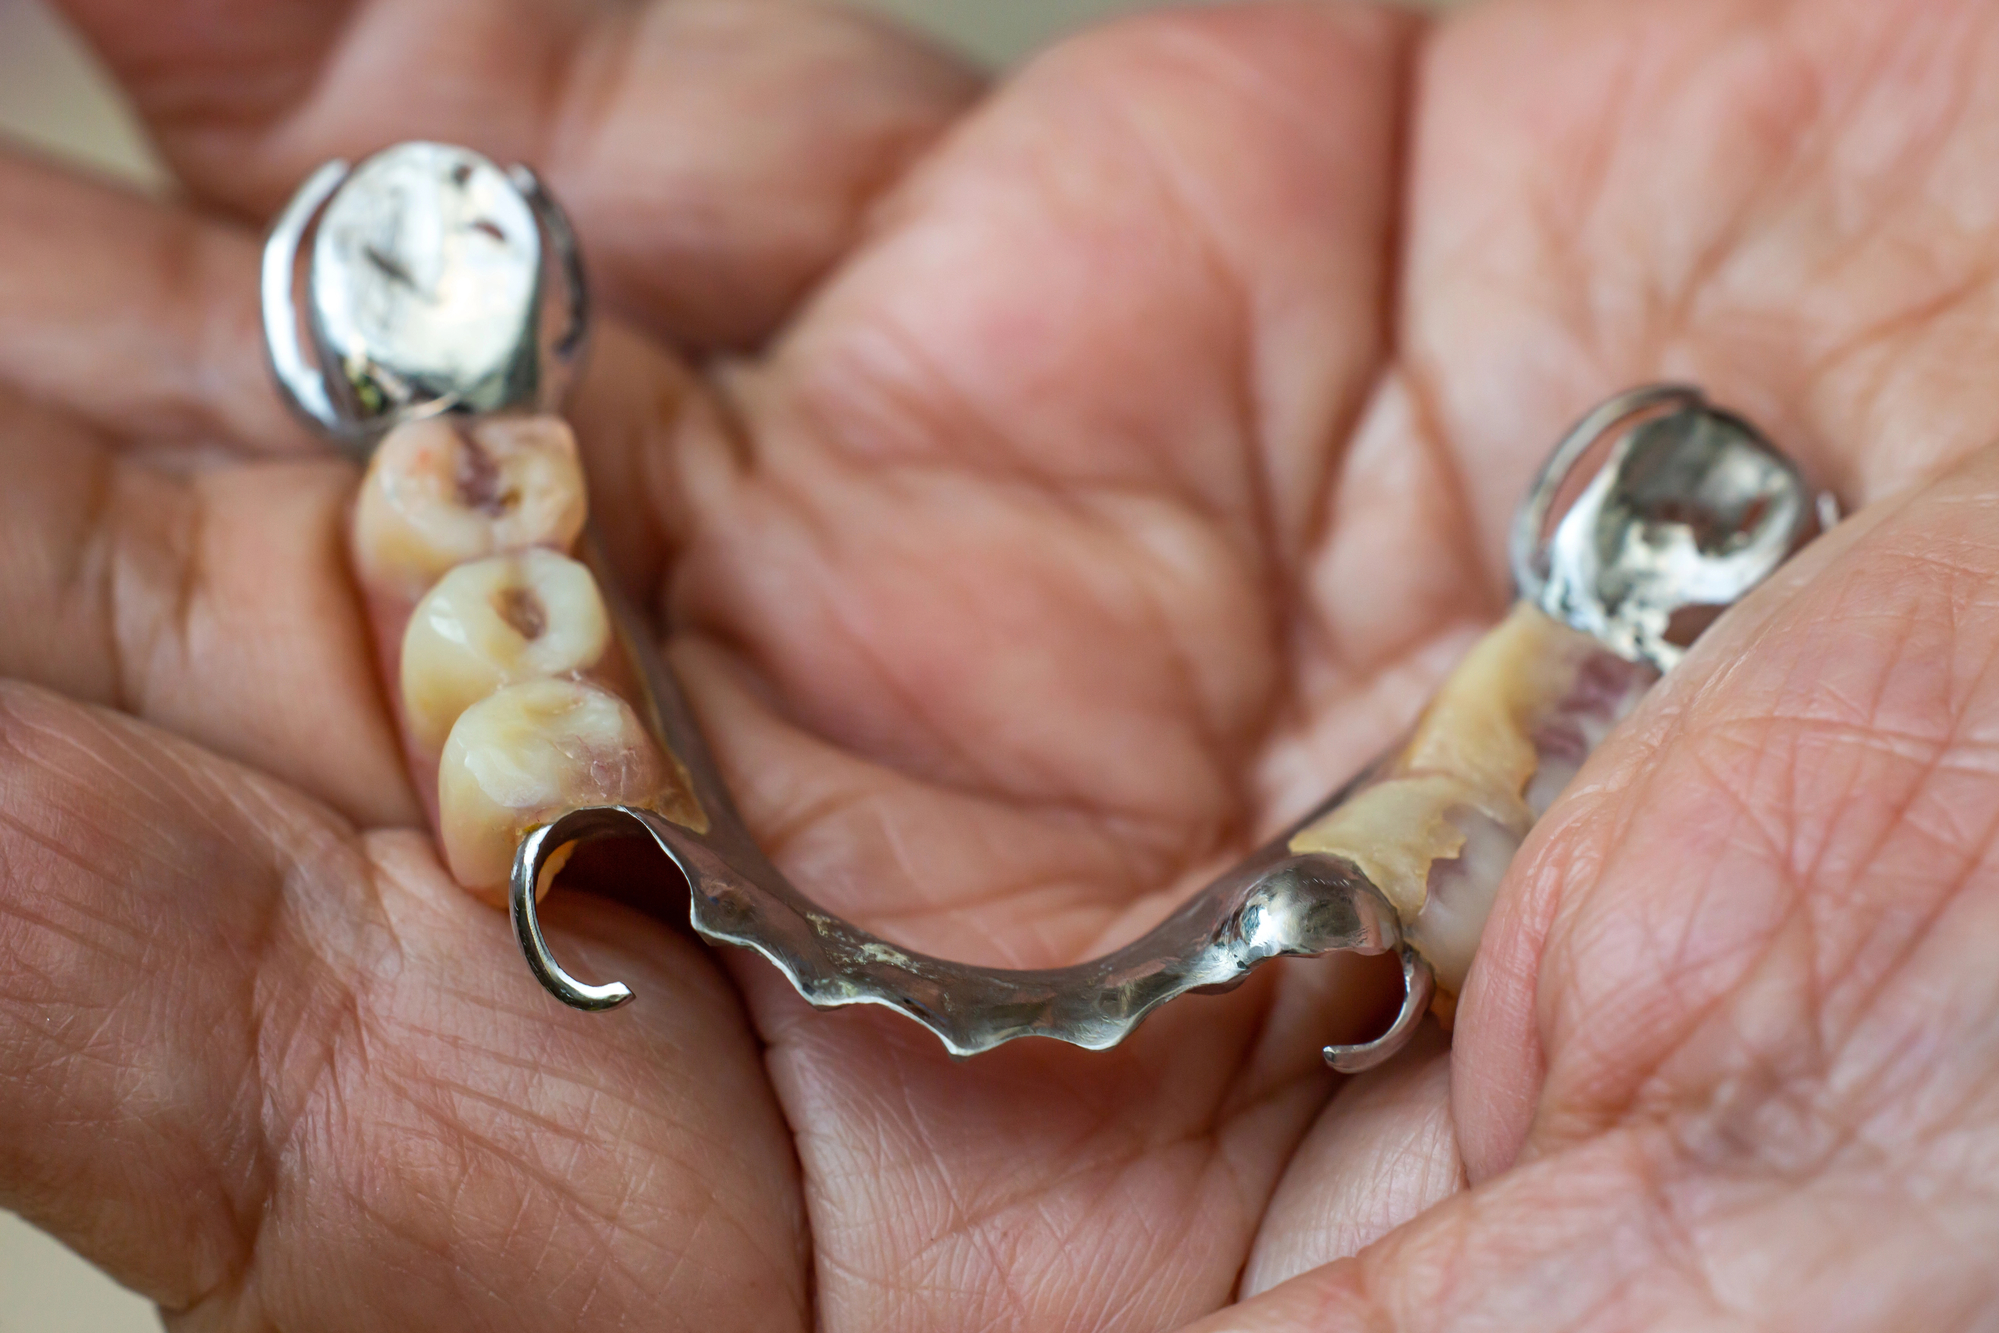 African american holding a dental bridge vs. Implant in their hand.